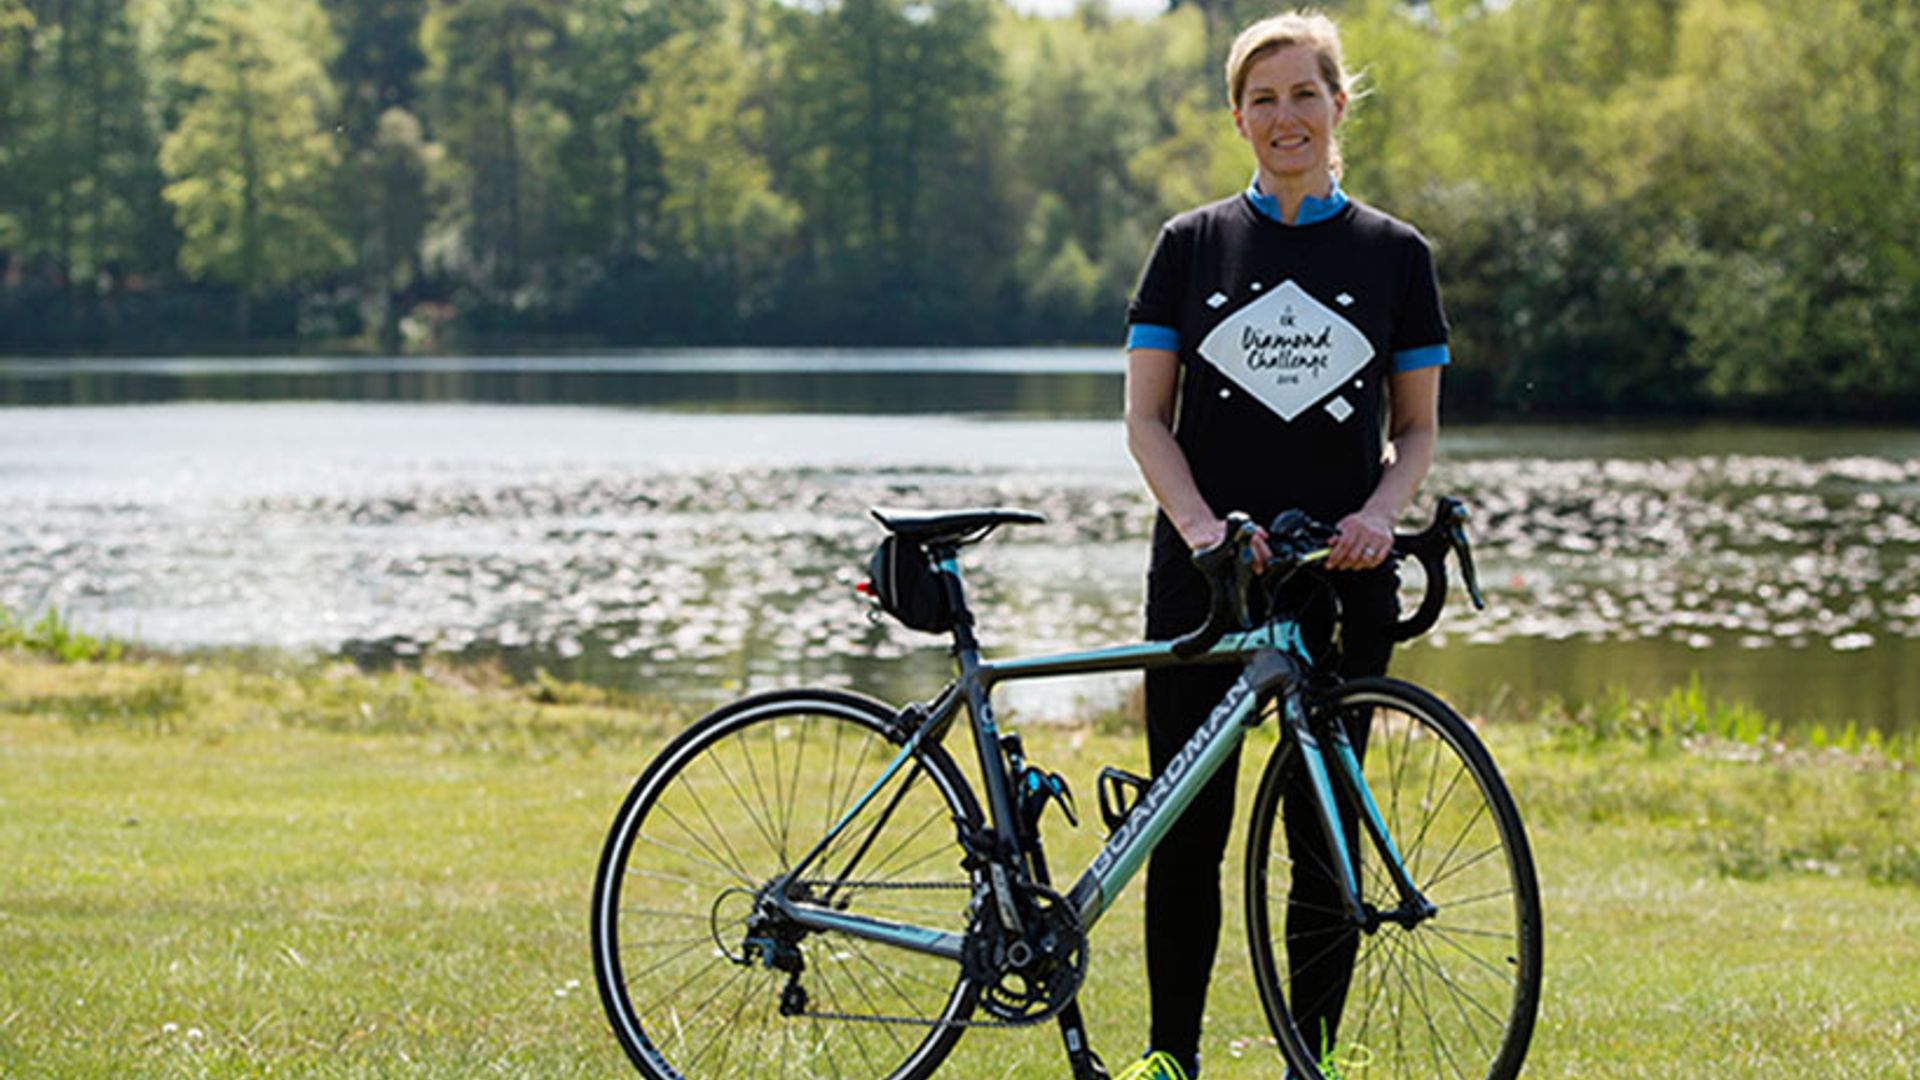 Sophie Wessex talks to HELLO! about her 445 mile cycle challenge: 'I'm ready to go!'